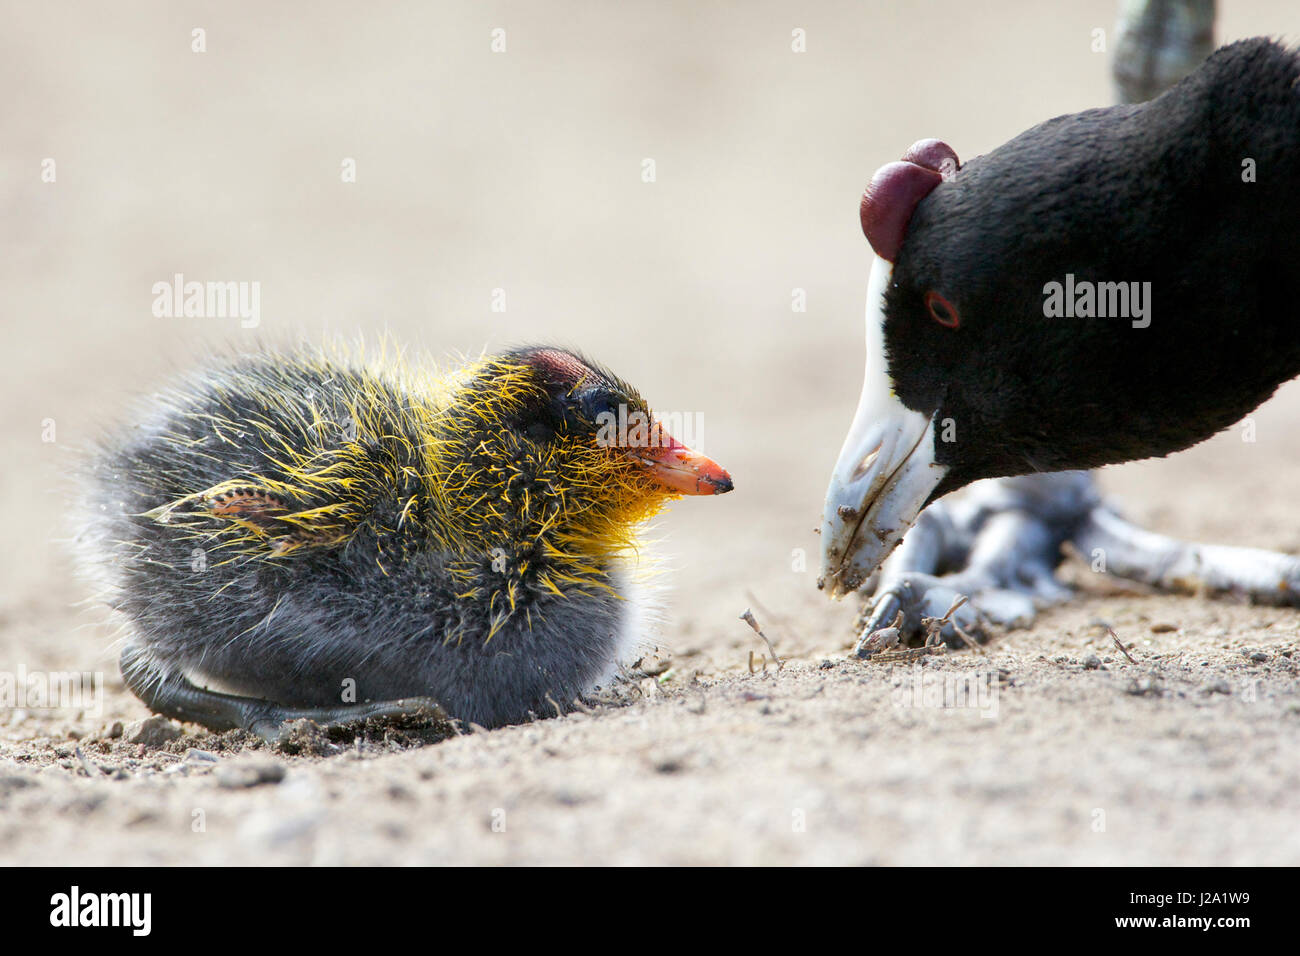 A crested coot with chick Stock Photo